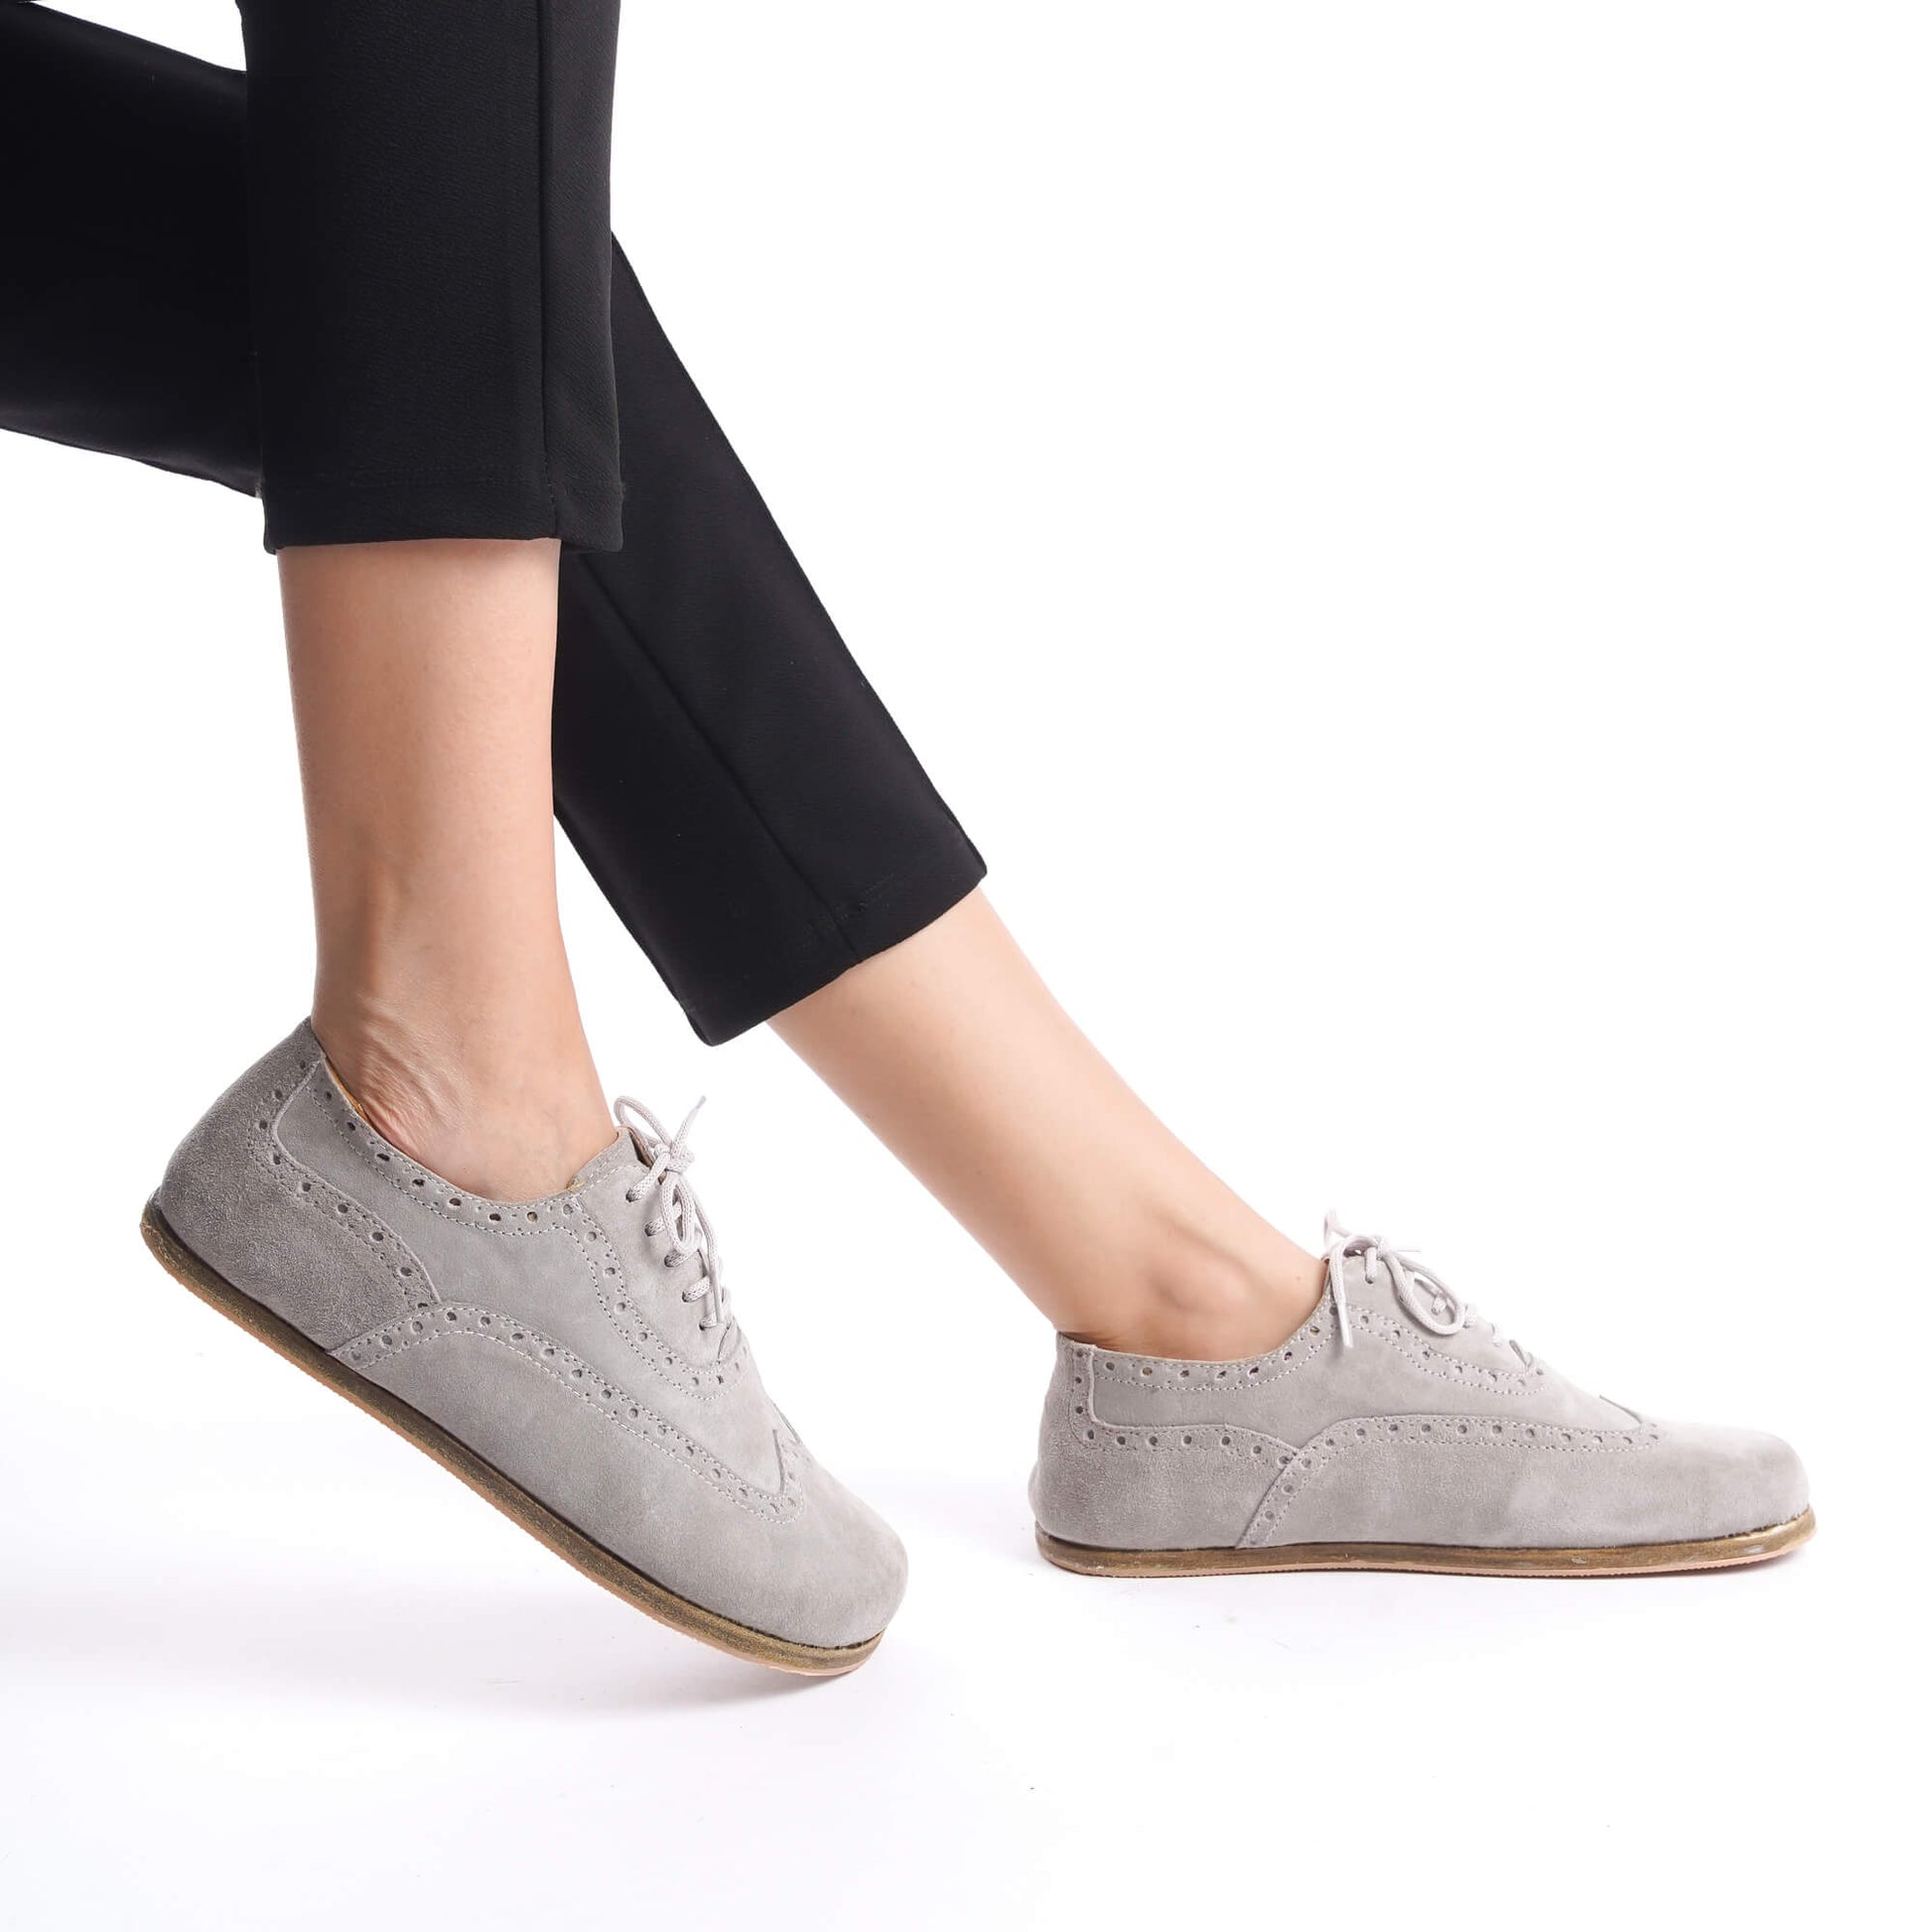 Side view of gray Doris leather barefoot women's oxfords, highlighting the zero-drop design and natural fit.